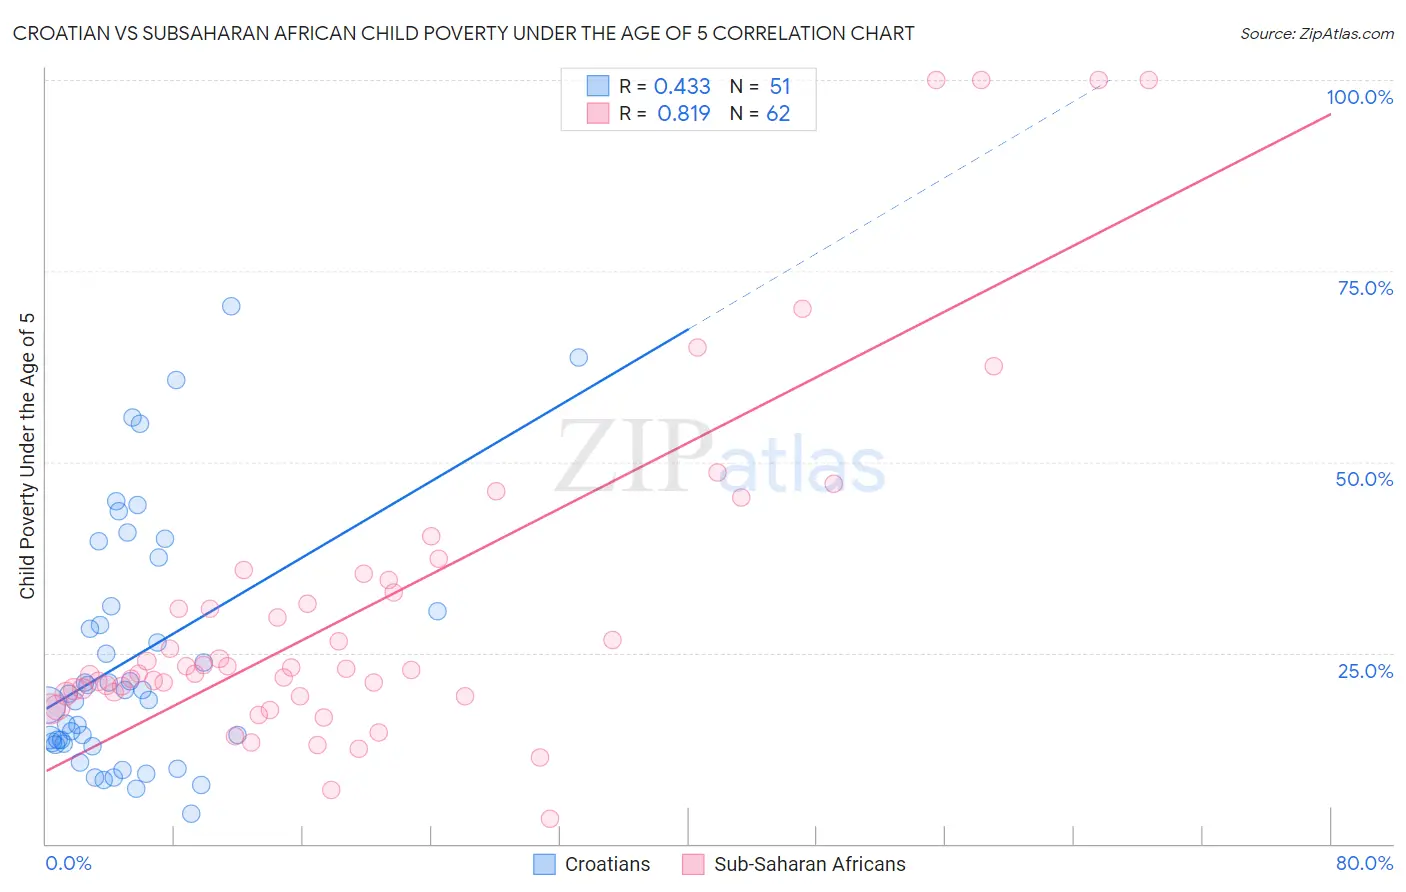 Croatian vs Subsaharan African Child Poverty Under the Age of 5